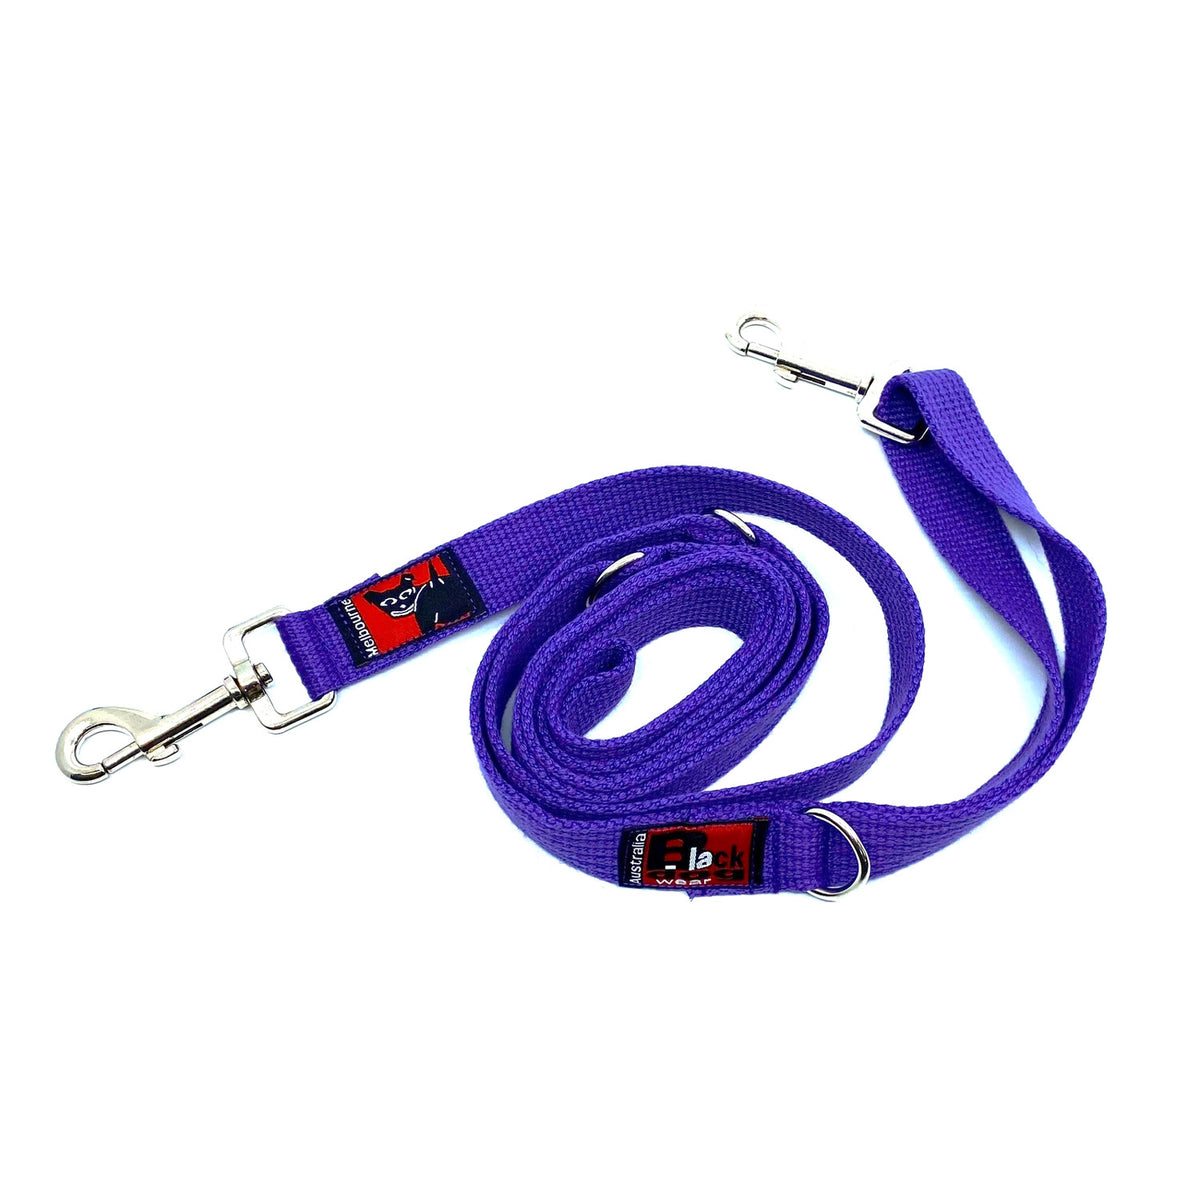 Black Dog Wear Double Ended / Double Snap Lead - Regular